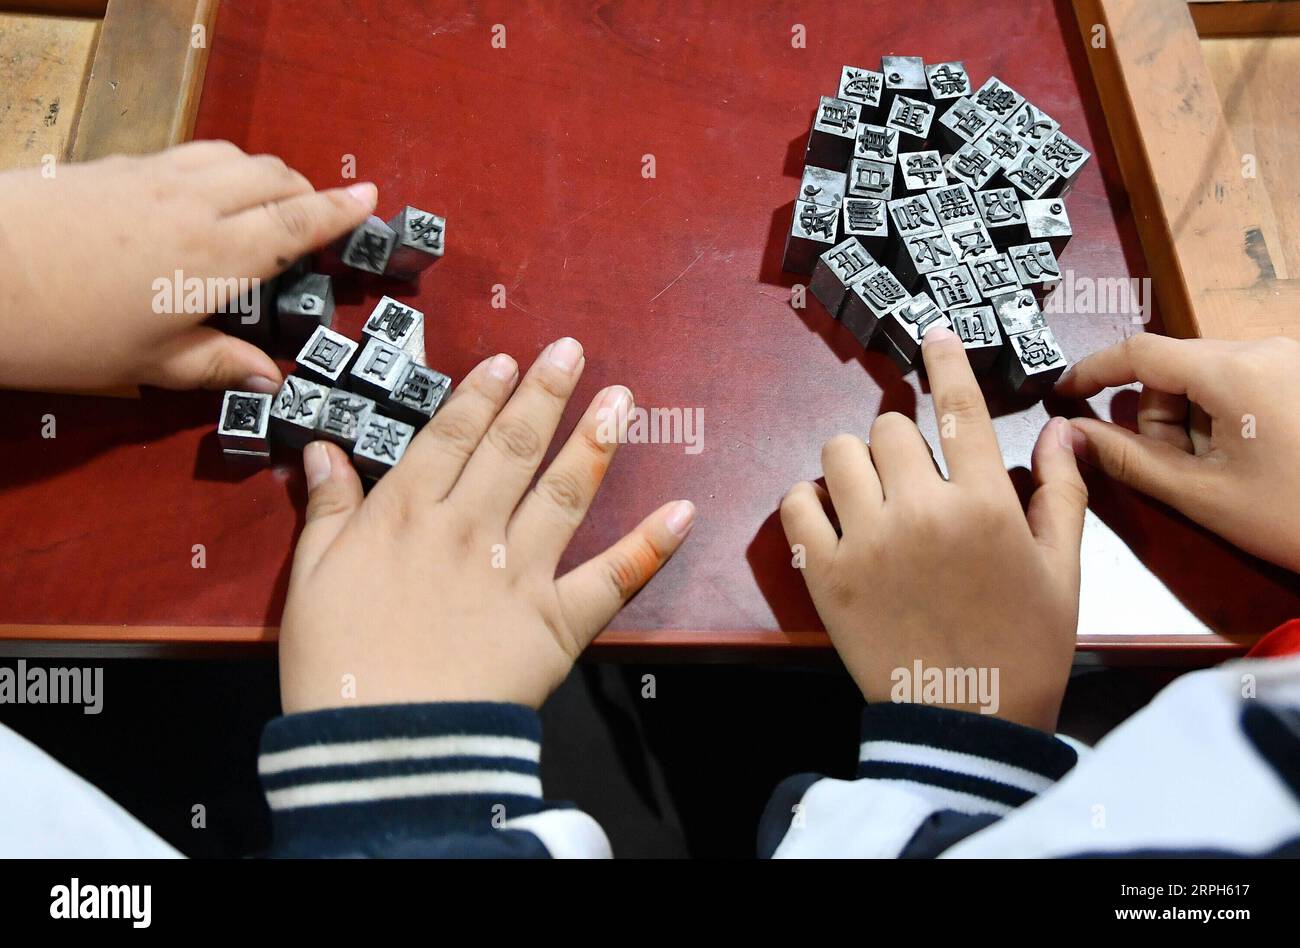 191031 -- JINAN, Oct. 31, 2019 -- Pupils of Xixian primary school experience movable-type printing at Lubei intangible cultural heritage experiencing center in Wudi County, east China s Shandong Province, Oct. 30, 2019. The experiencing center provides a variety of intangible cultural heritage experiencing programs, including the arts of rubbing, ceramics, tie dyeing, paper-making and movable-type printing, aiming to promote traditional Chinese culture through immersive experience.  CHINA-SHANDONG-JINAN-INTANGIBLE CULTURAL HERITAGE-CENTER CN ZhuxZheng PUBLICATIONxNOTxINxCHN Stock Photo